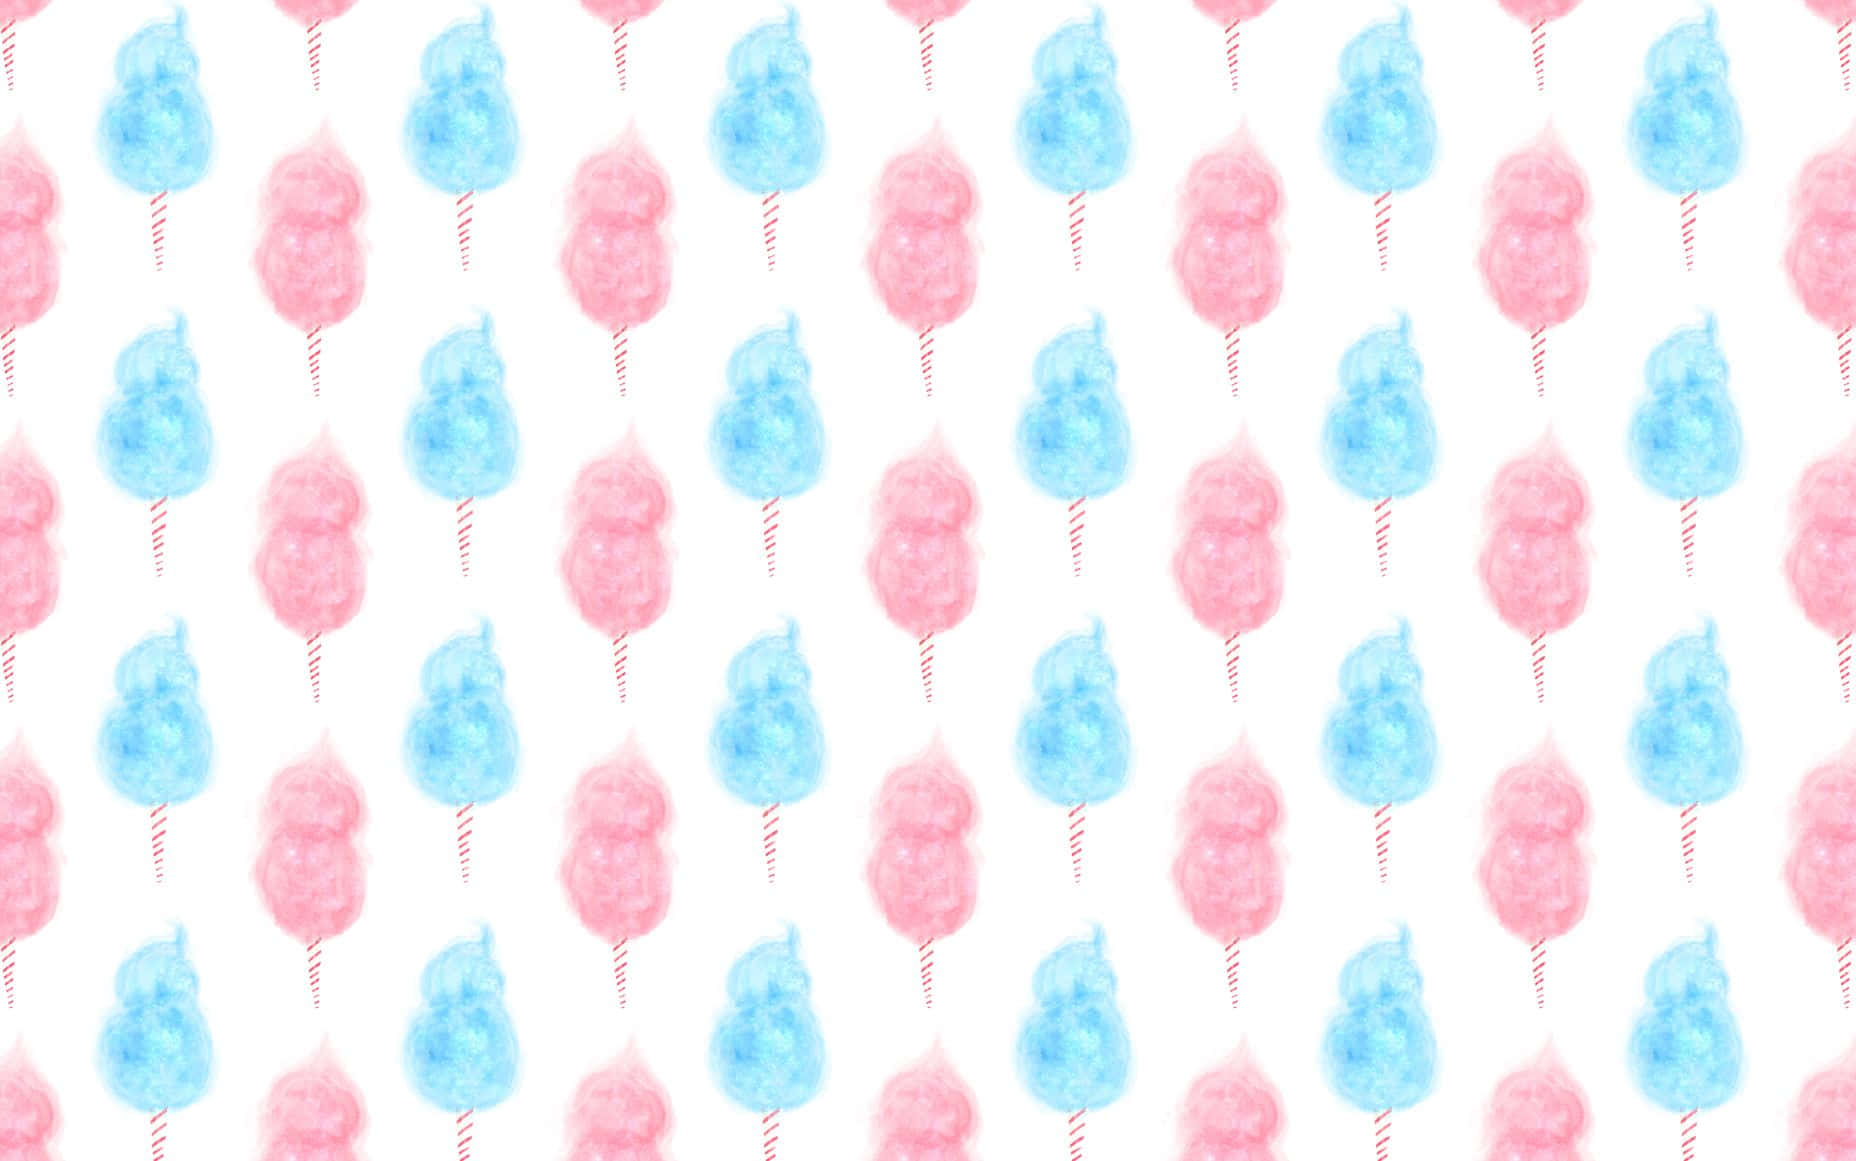 Numerous Pink And Blue Cotton Candy Background